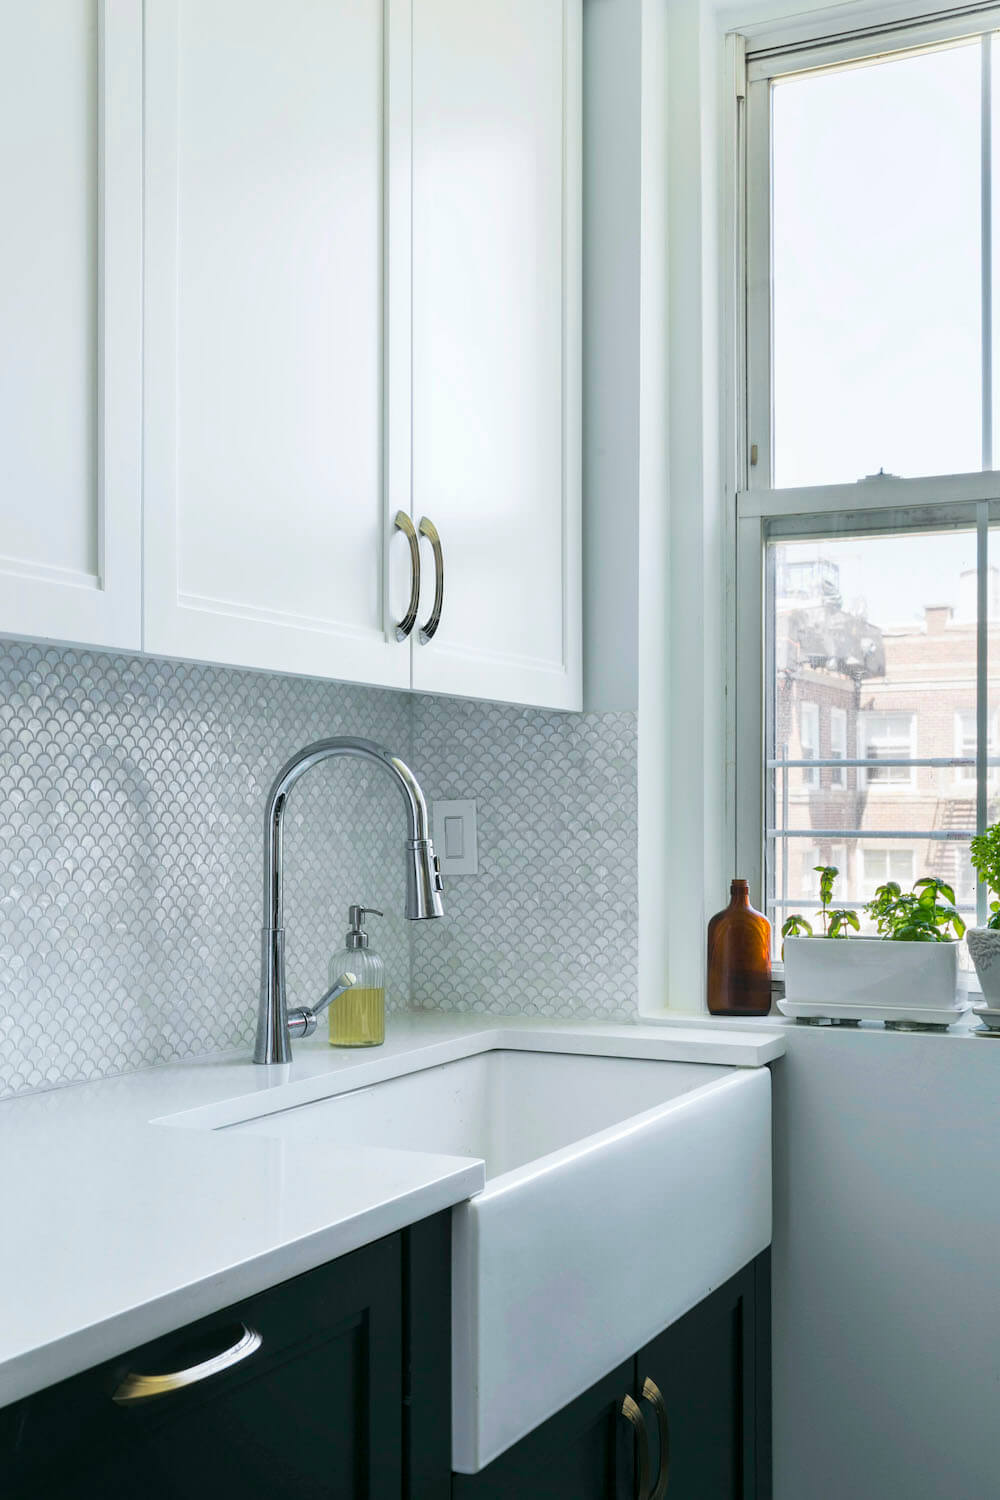 Kitchen sink with white countertops and cabinets and tiled backsplash